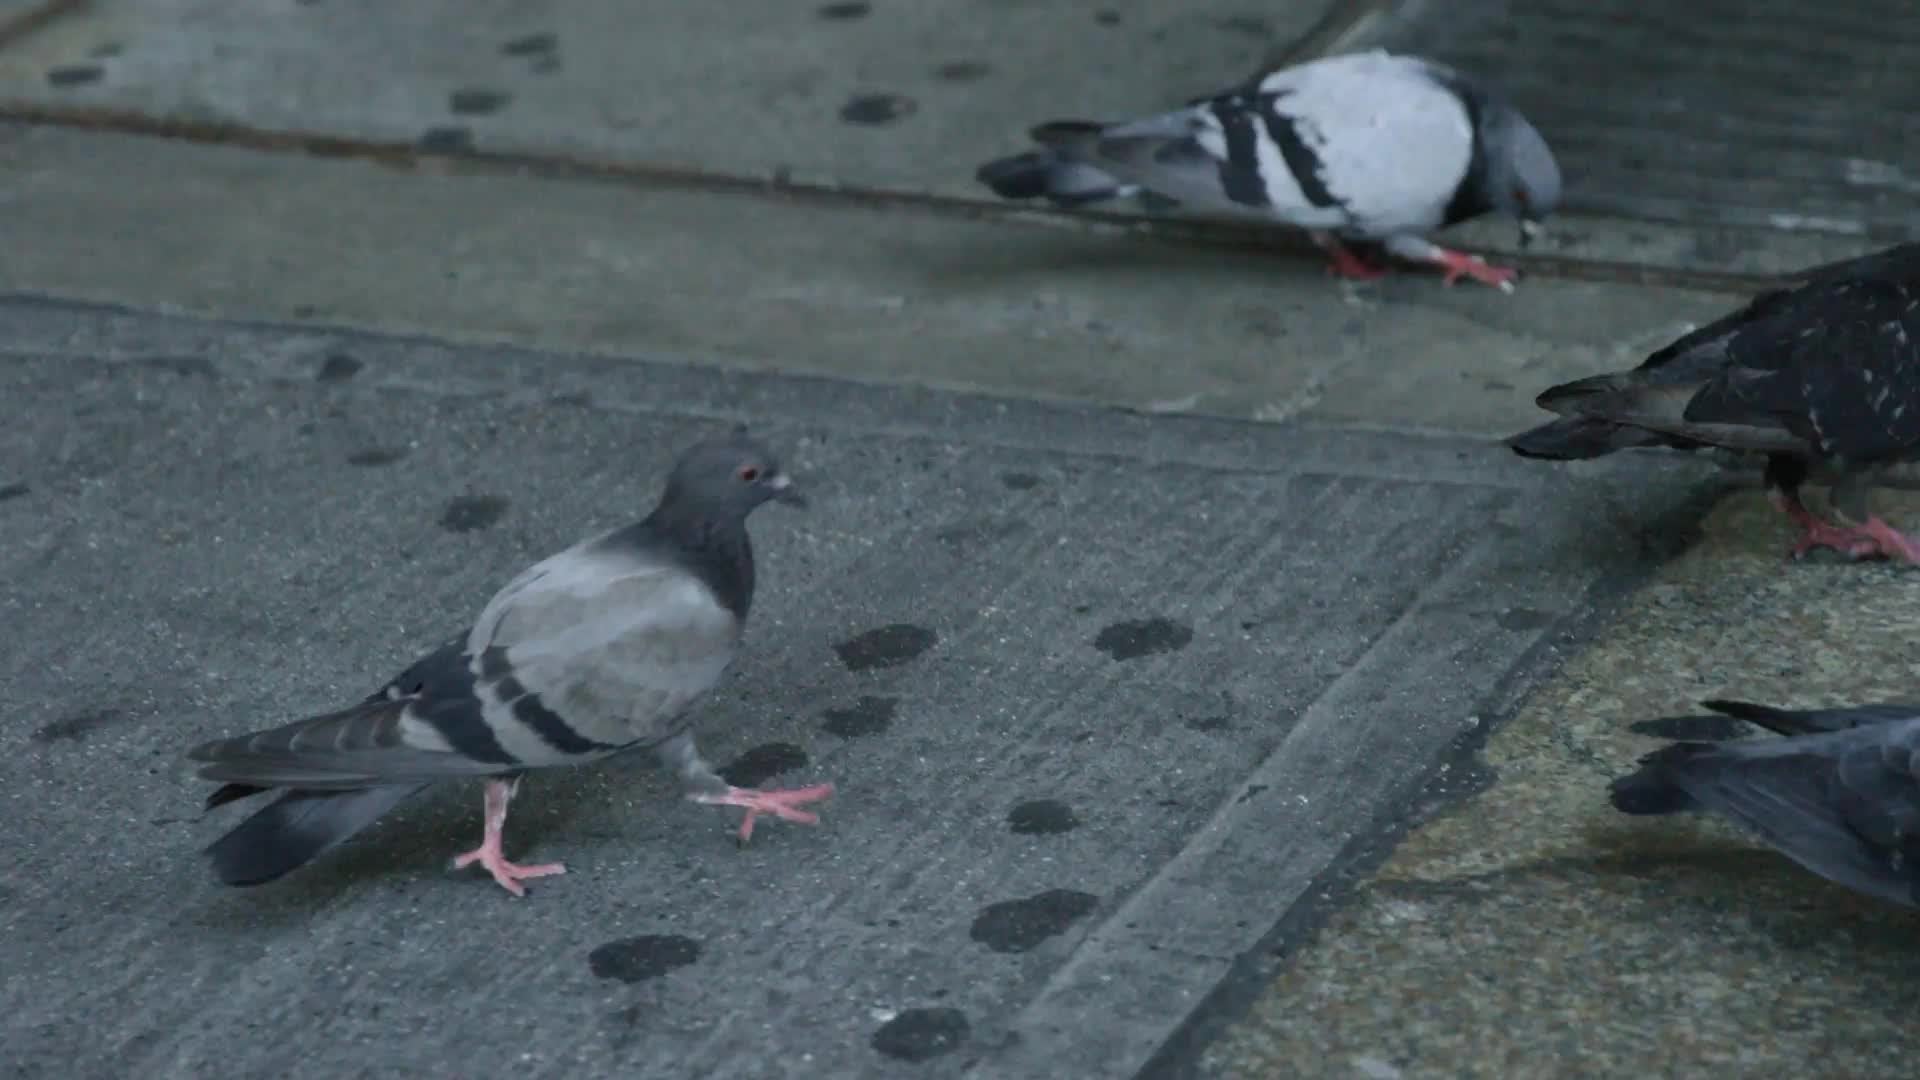 pigeons flapping wings on street grating - dirty birds on ground in city - slow motion